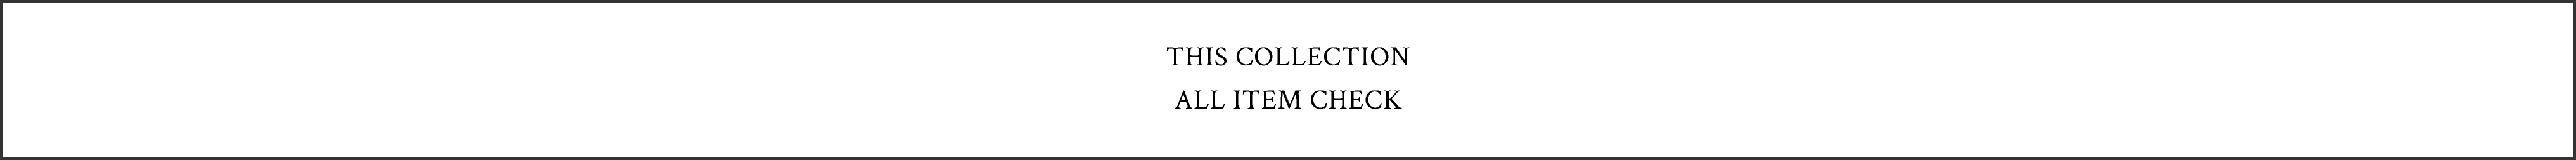 THE COLLECTION ALL ITEM CHECK